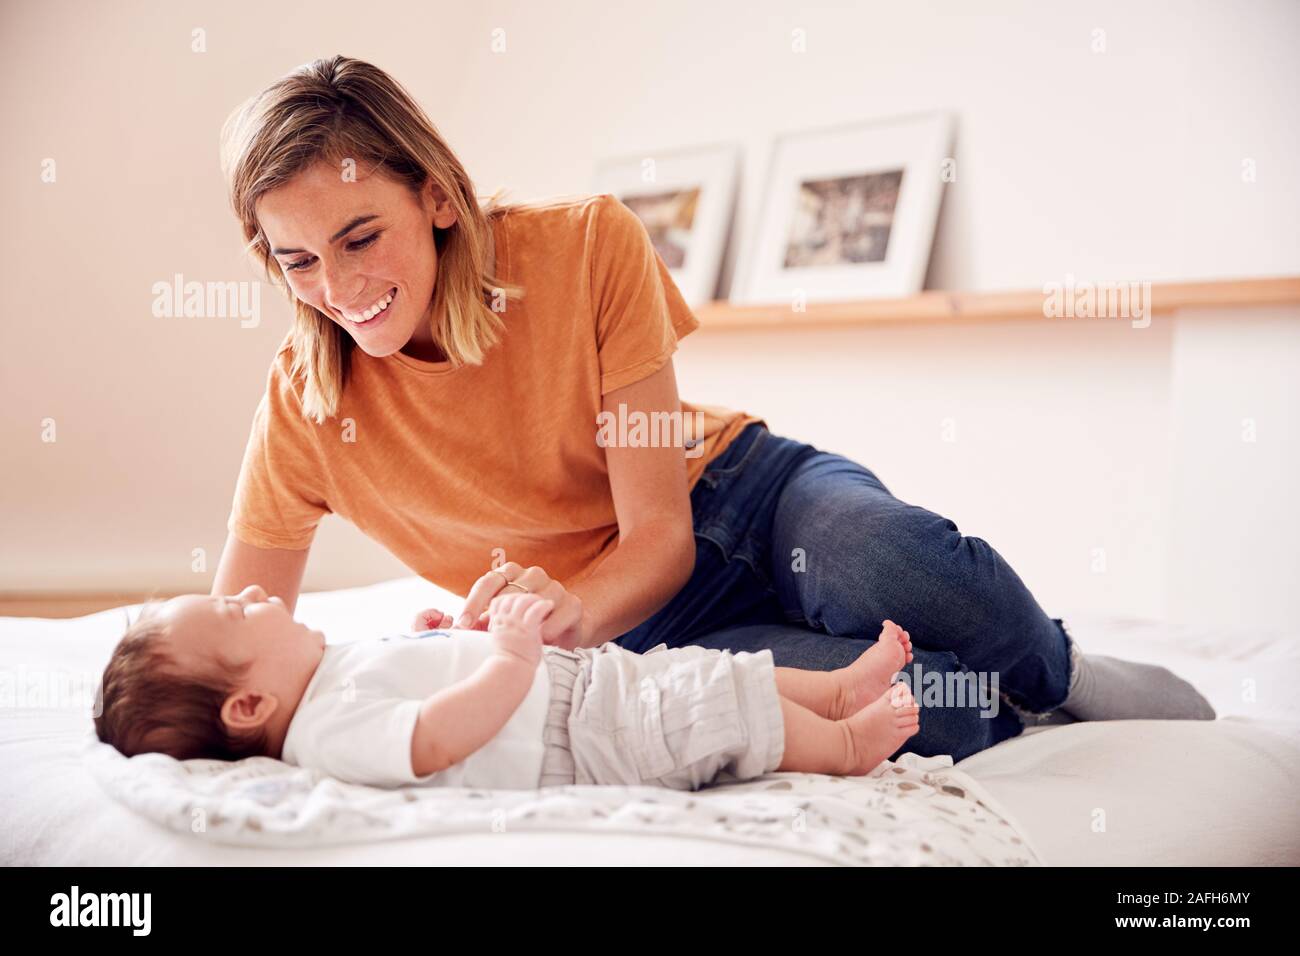 Loving Mother With Newborn Baby Lying On Bed At Home In Loft Apartment Stock Photo